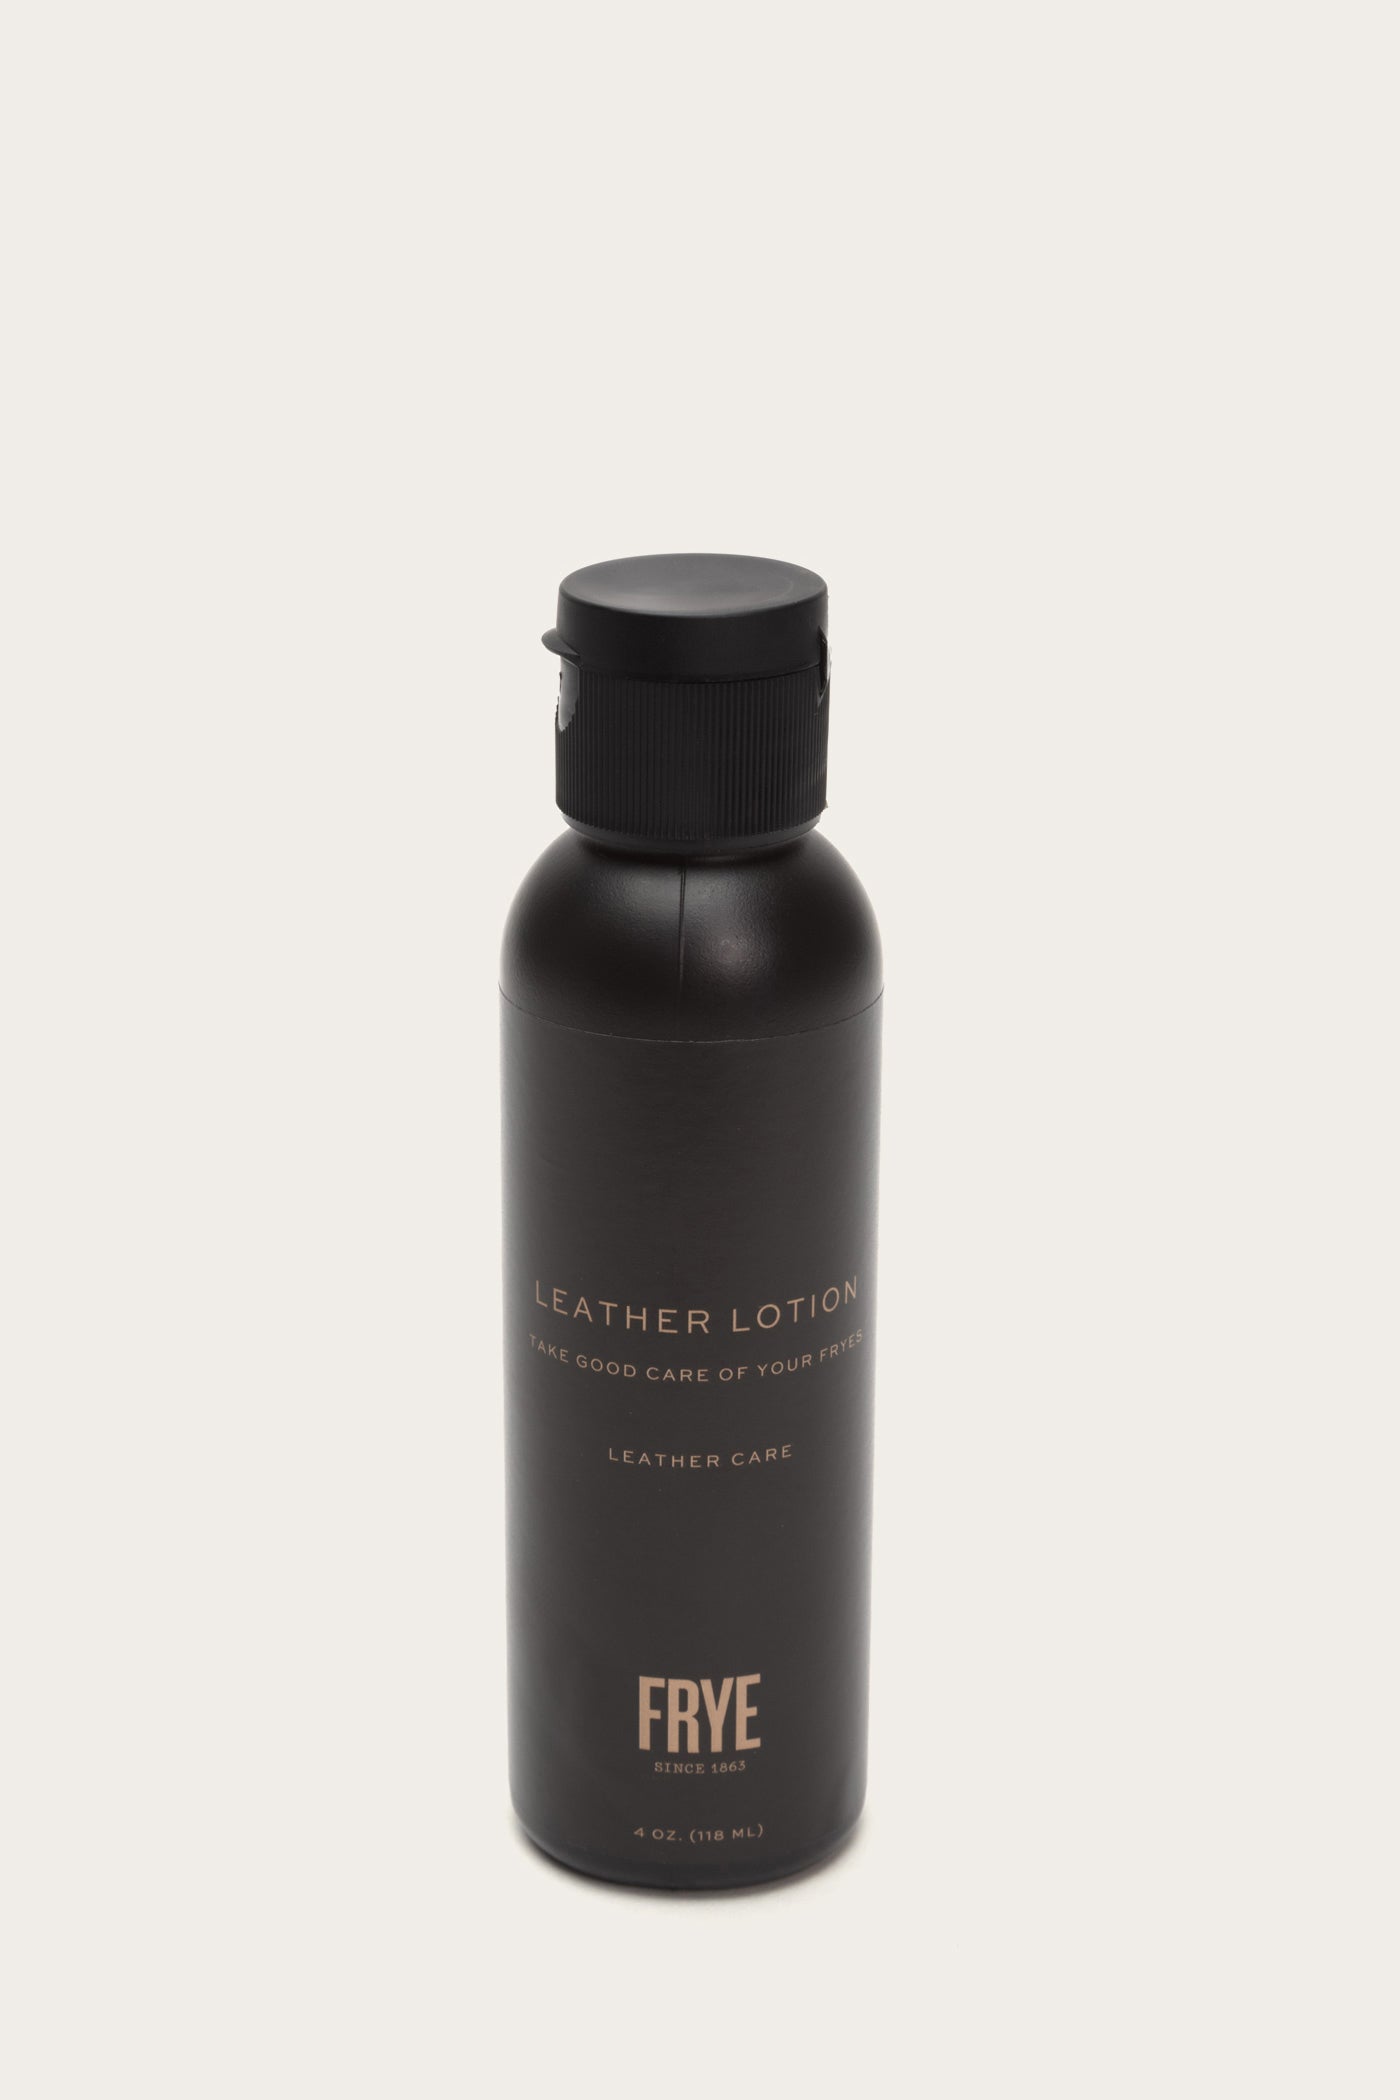 frye leather care